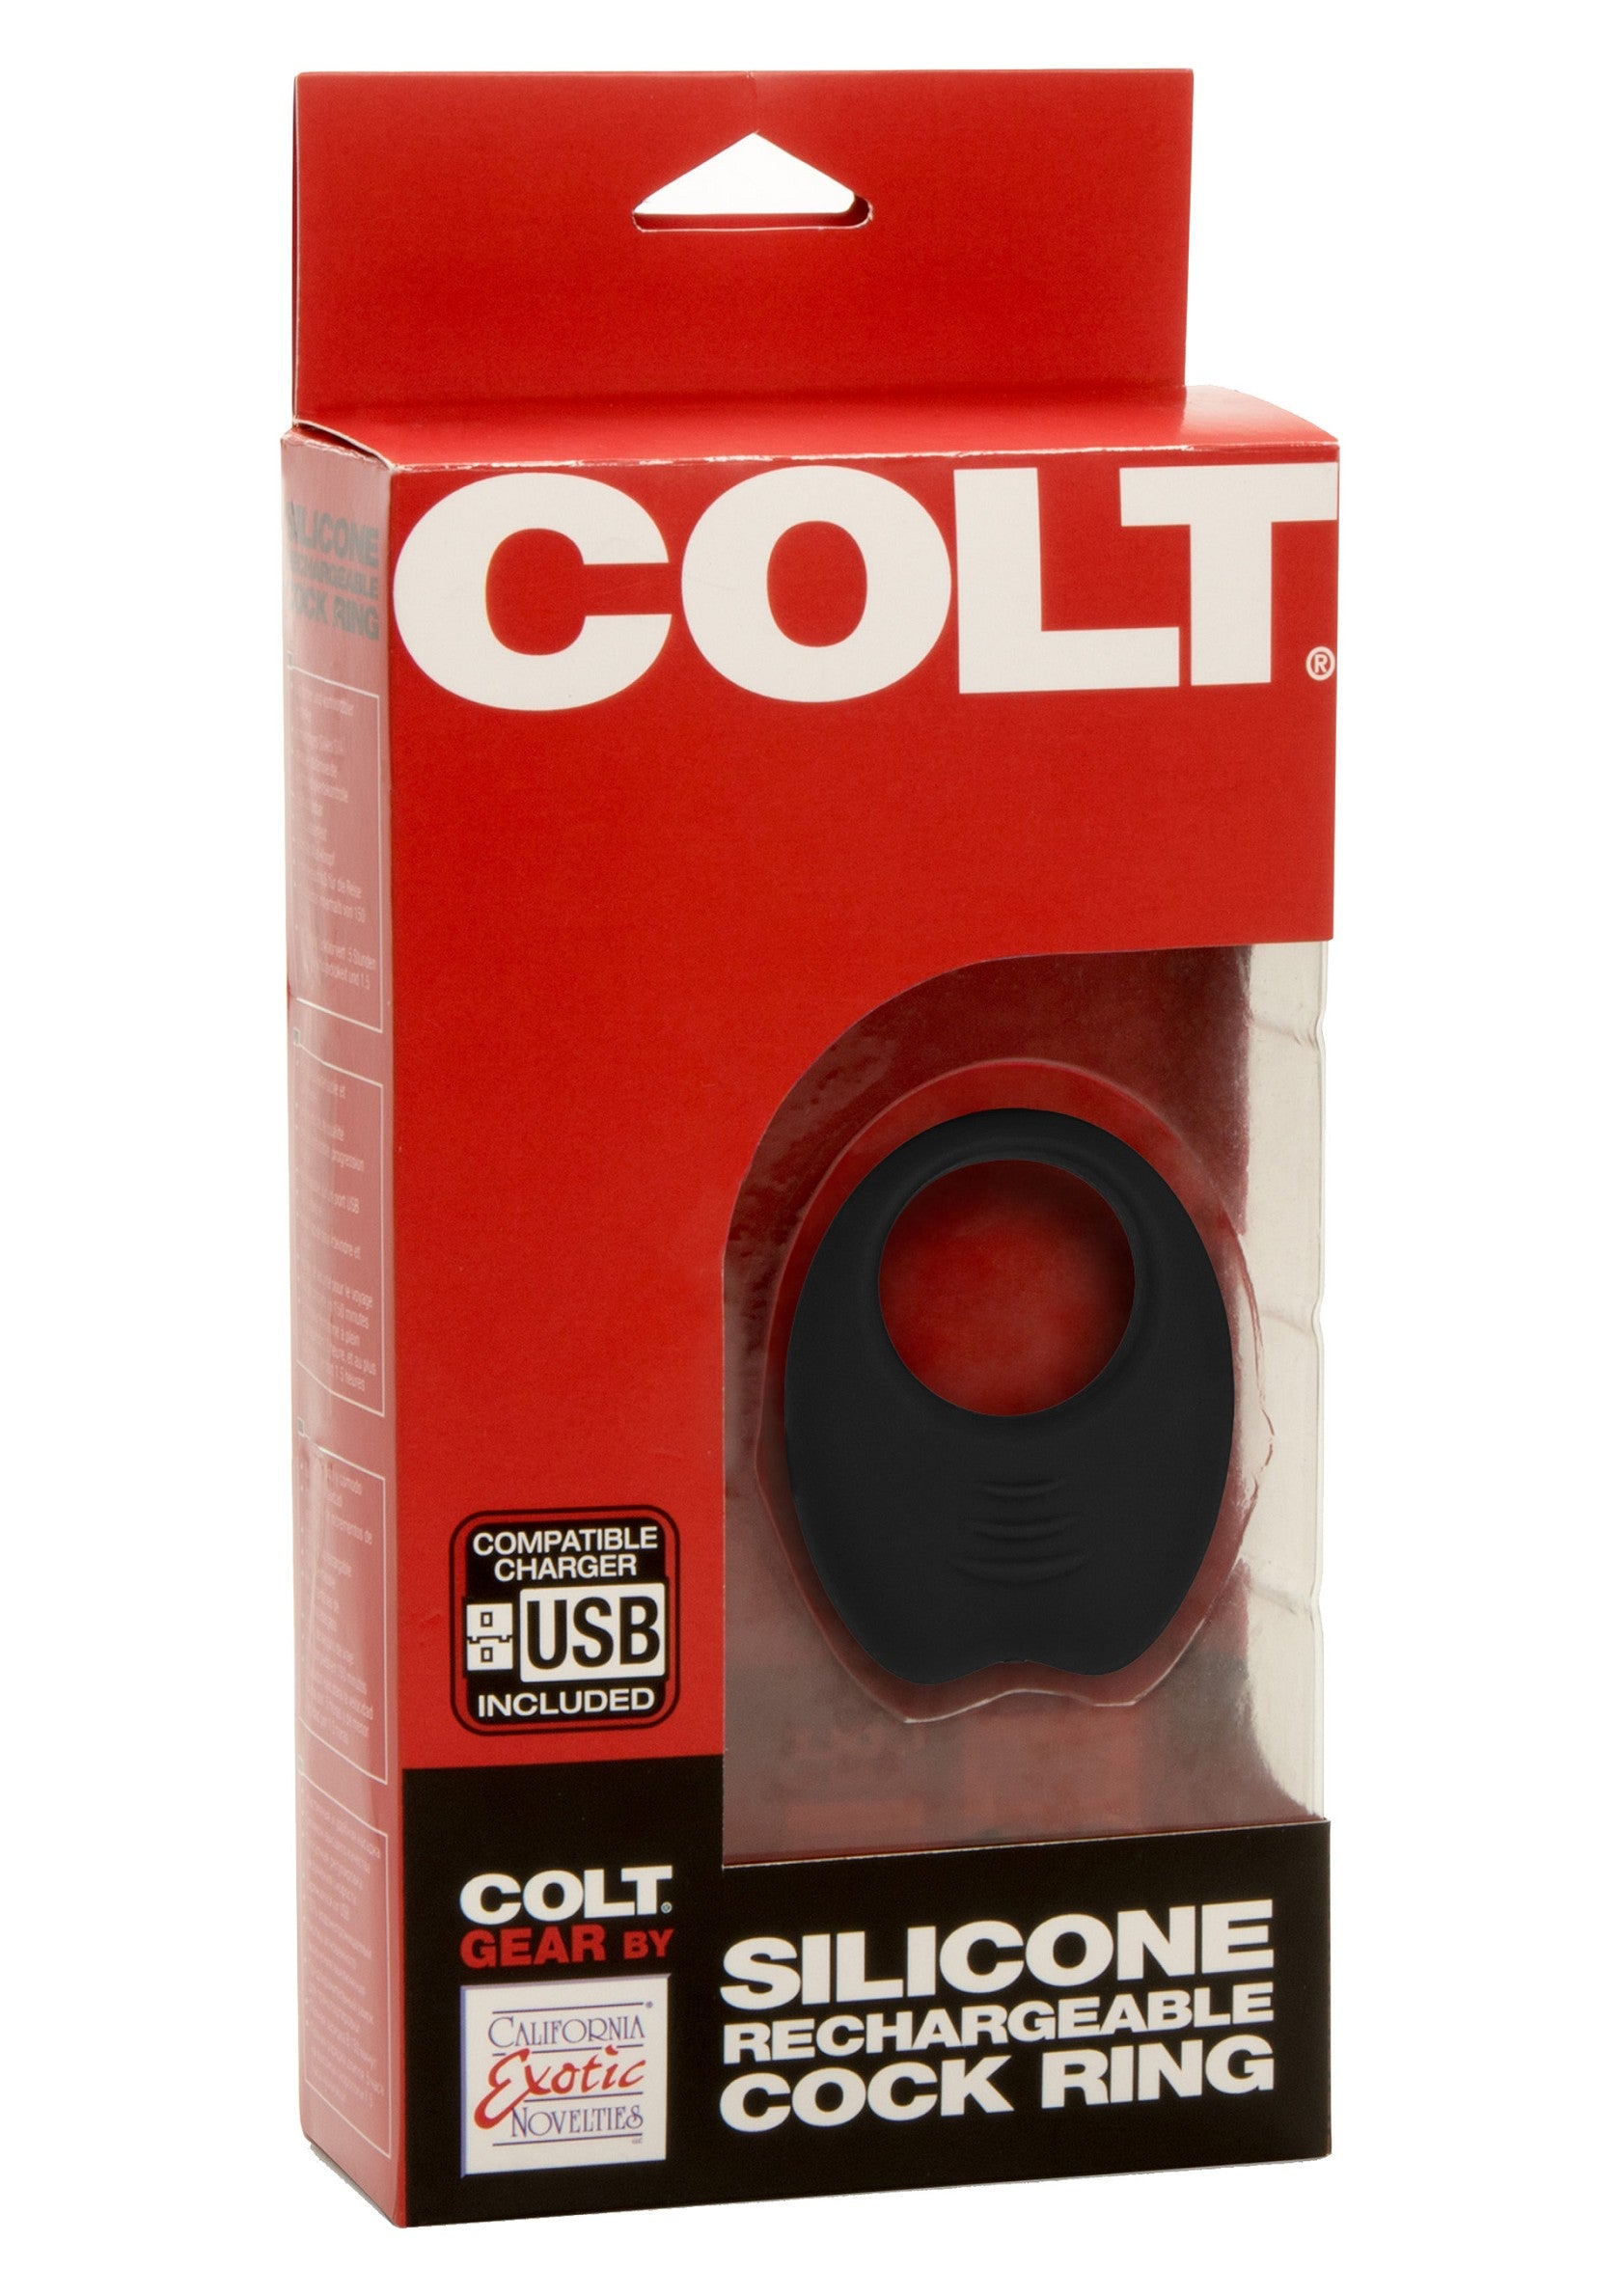 CalExotics COLT Silicone Rechargeable Cock Ring BLACK - 1